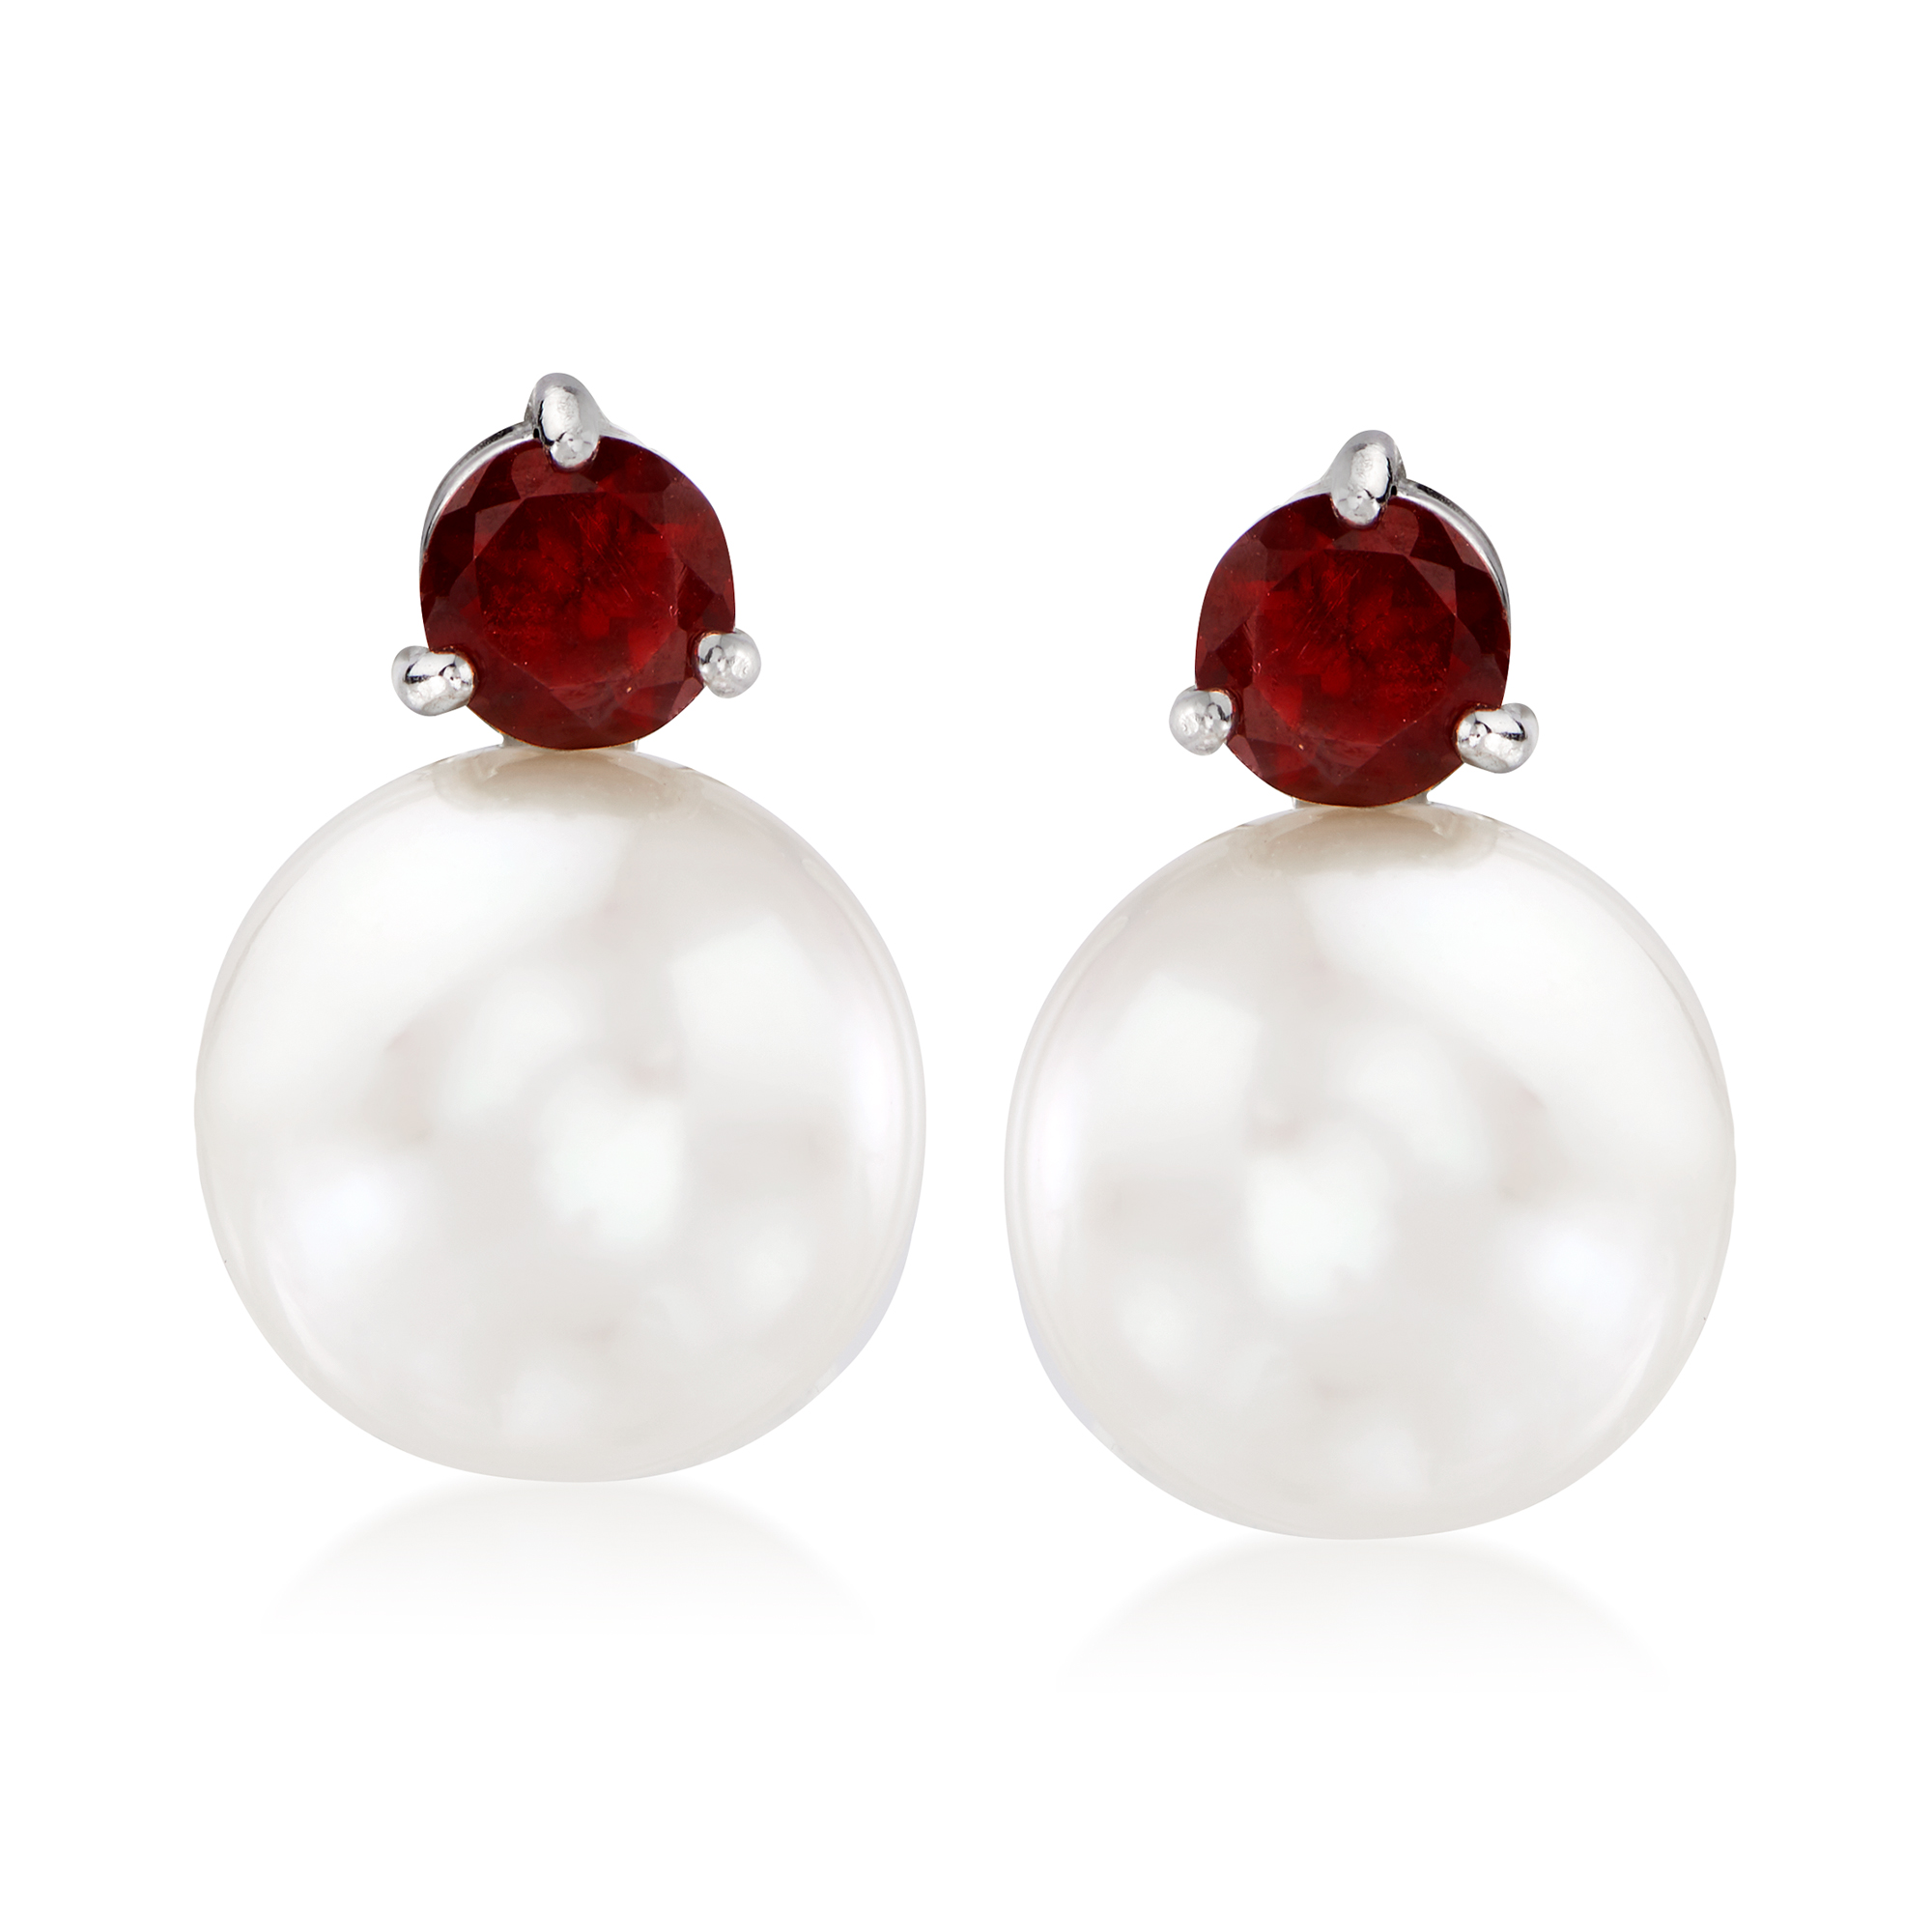 11mm Cultured Pearl and 1.00 ct. t.w. Garnet Earrings in Sterling Silver |  Ross-Simons